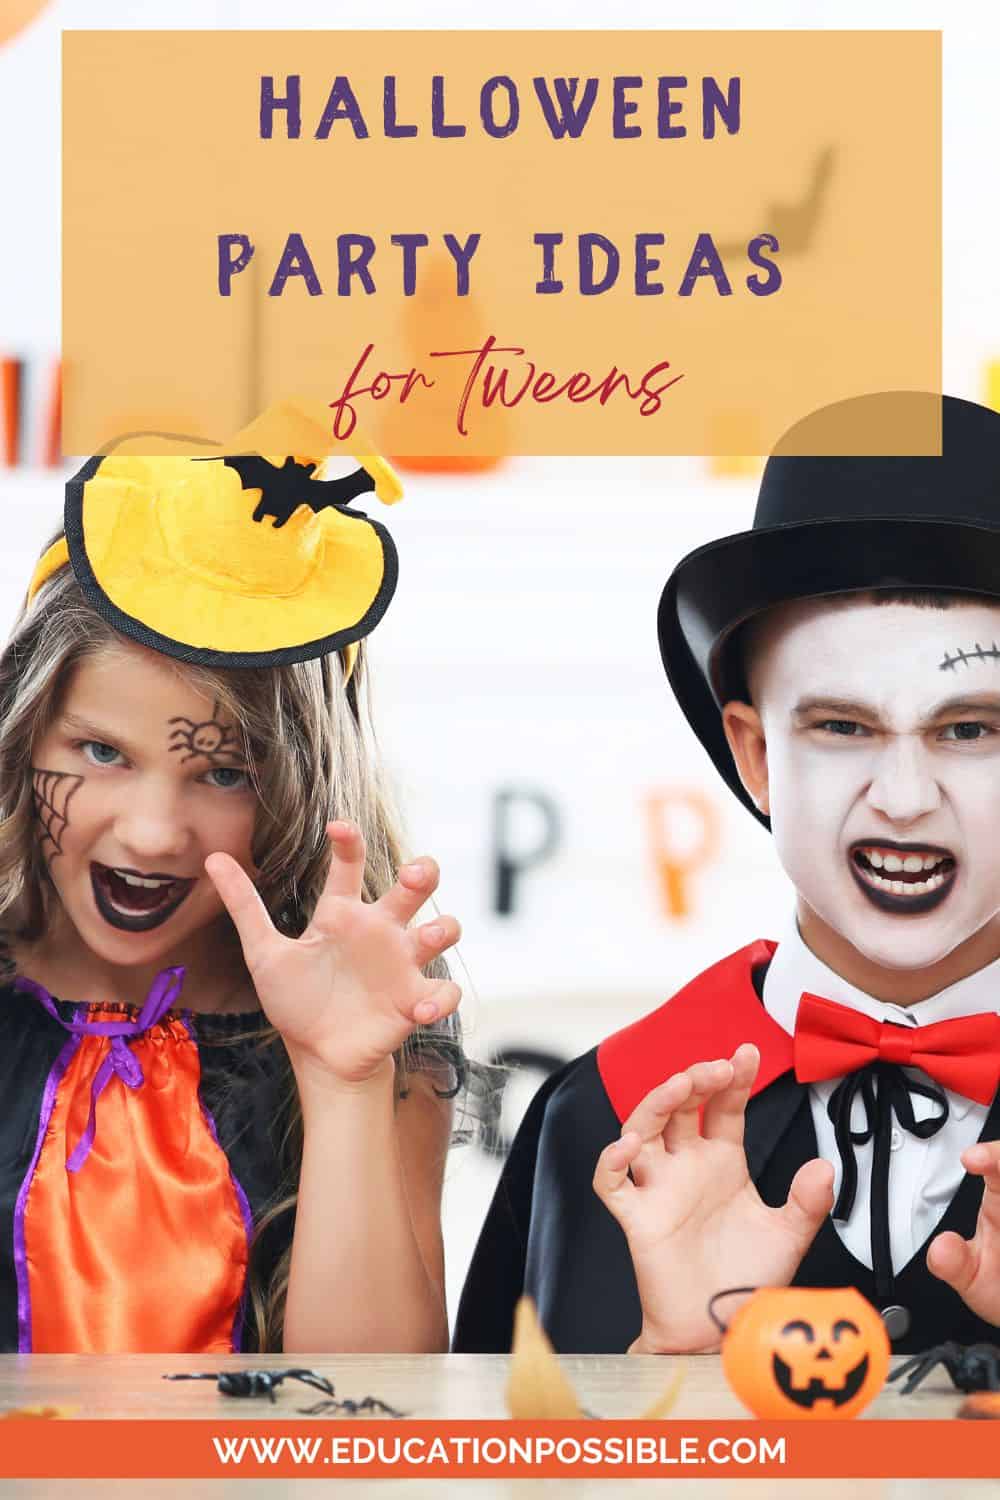 Tween girl dressed like a colorful witch and boy dressed as Dracula at a Halloween party